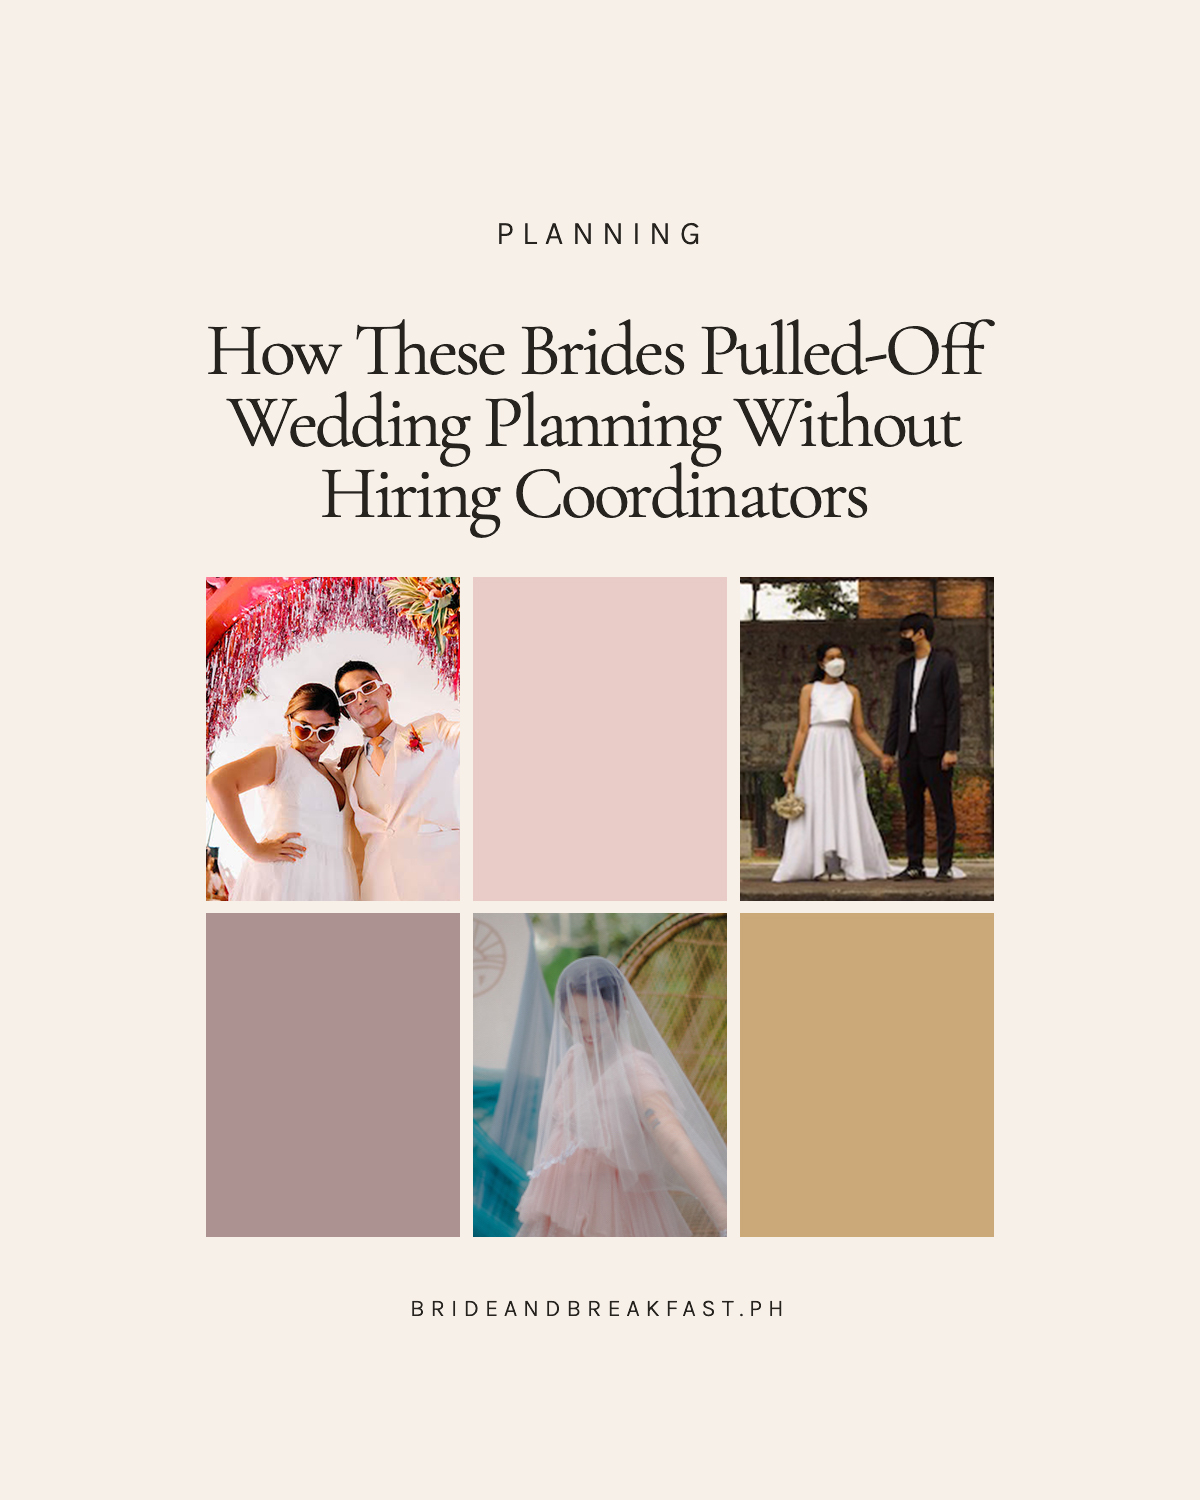 How These Brides Pulled-Off Wedding Planning Without Hiring Coordinators